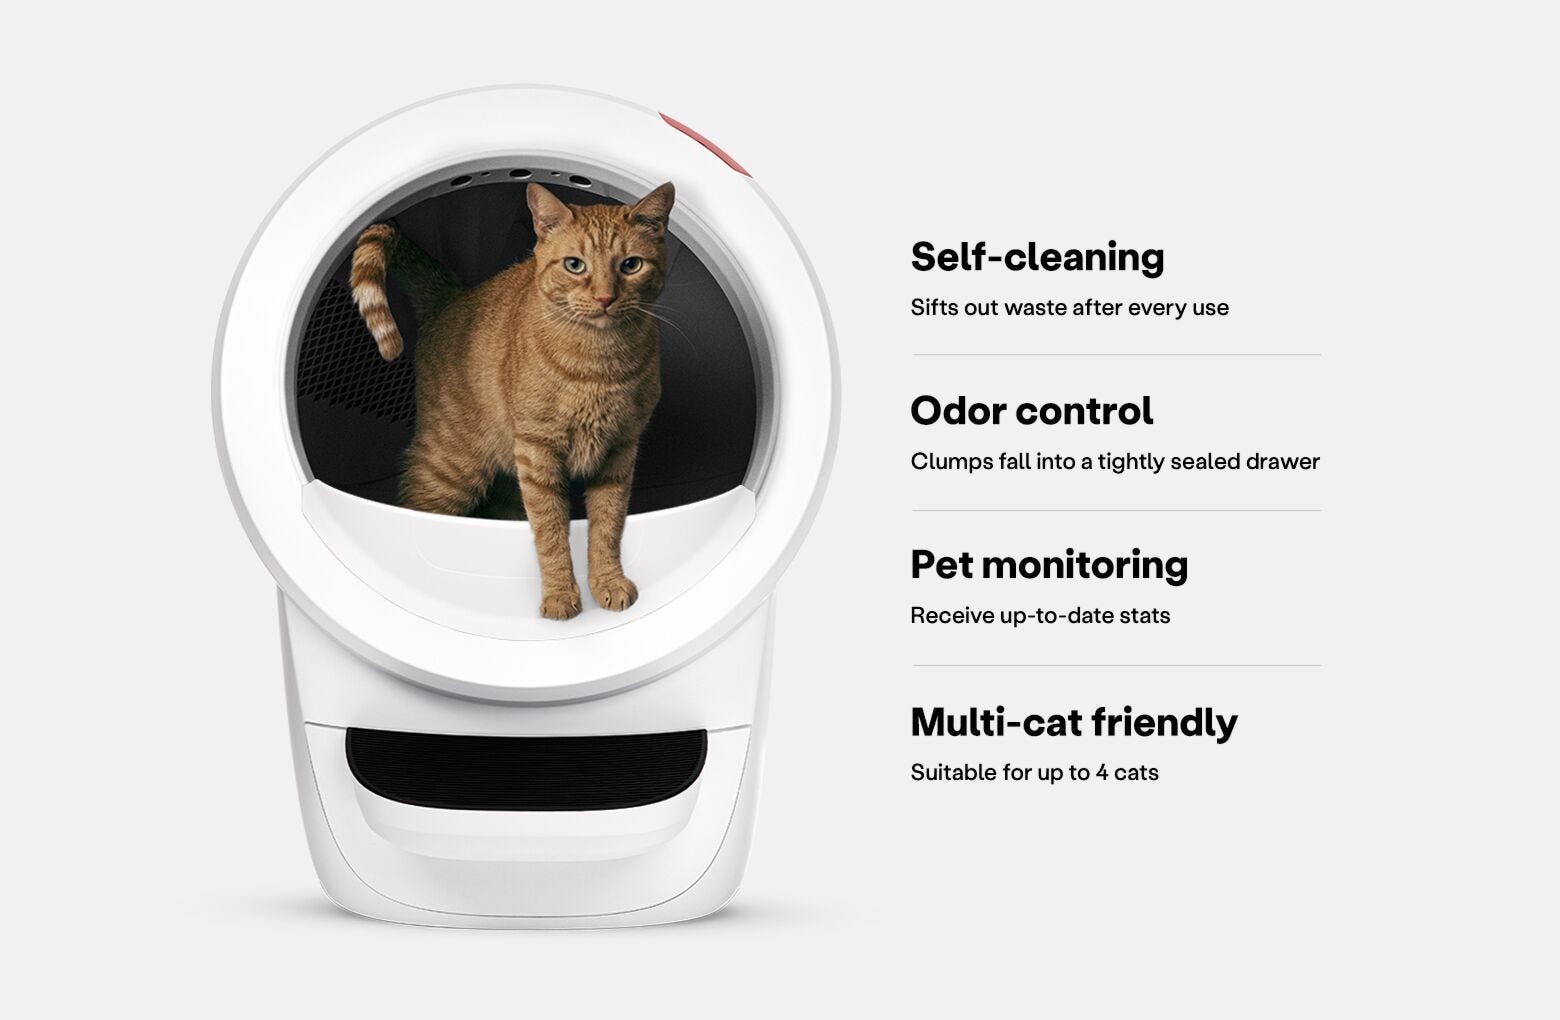 This unique litter box has saved me hours on cleaning my apartment